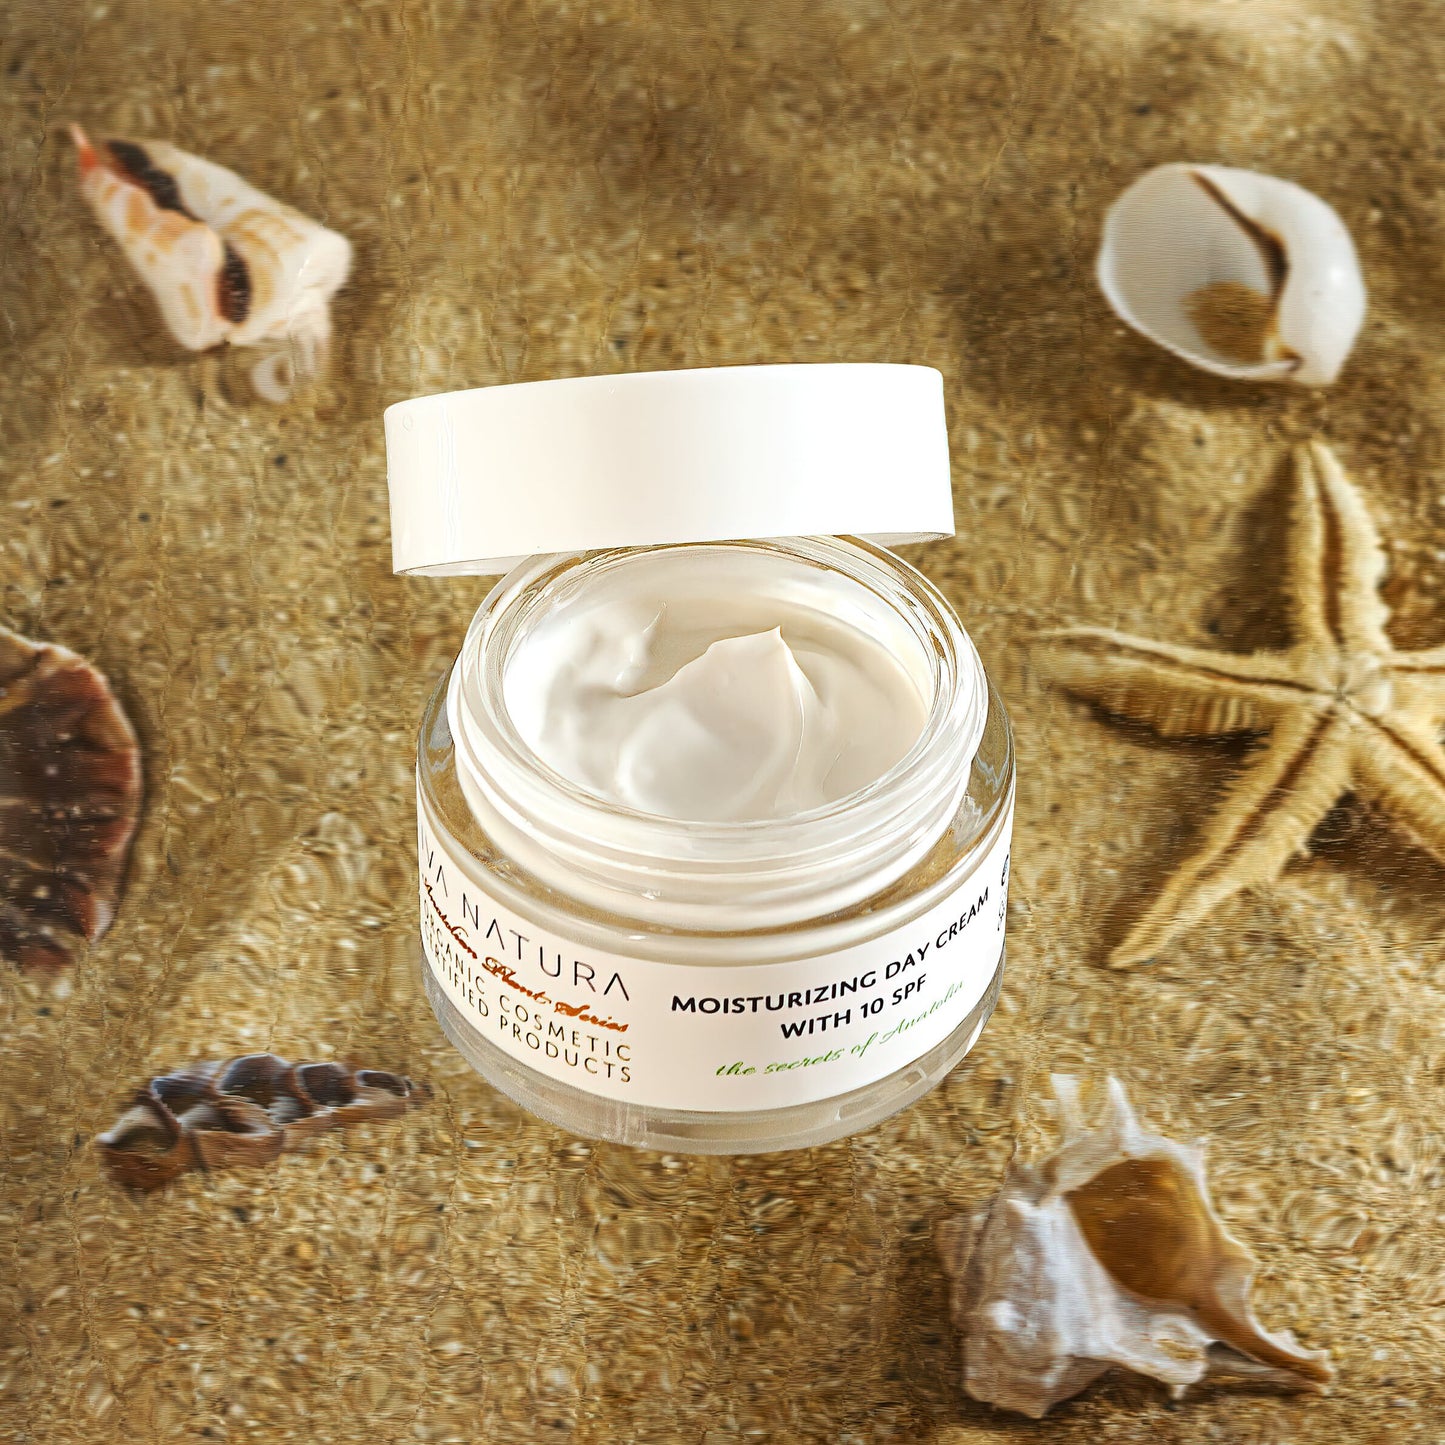 Buy now the best organic, chemical free and toxins free day cream with 10 SPF